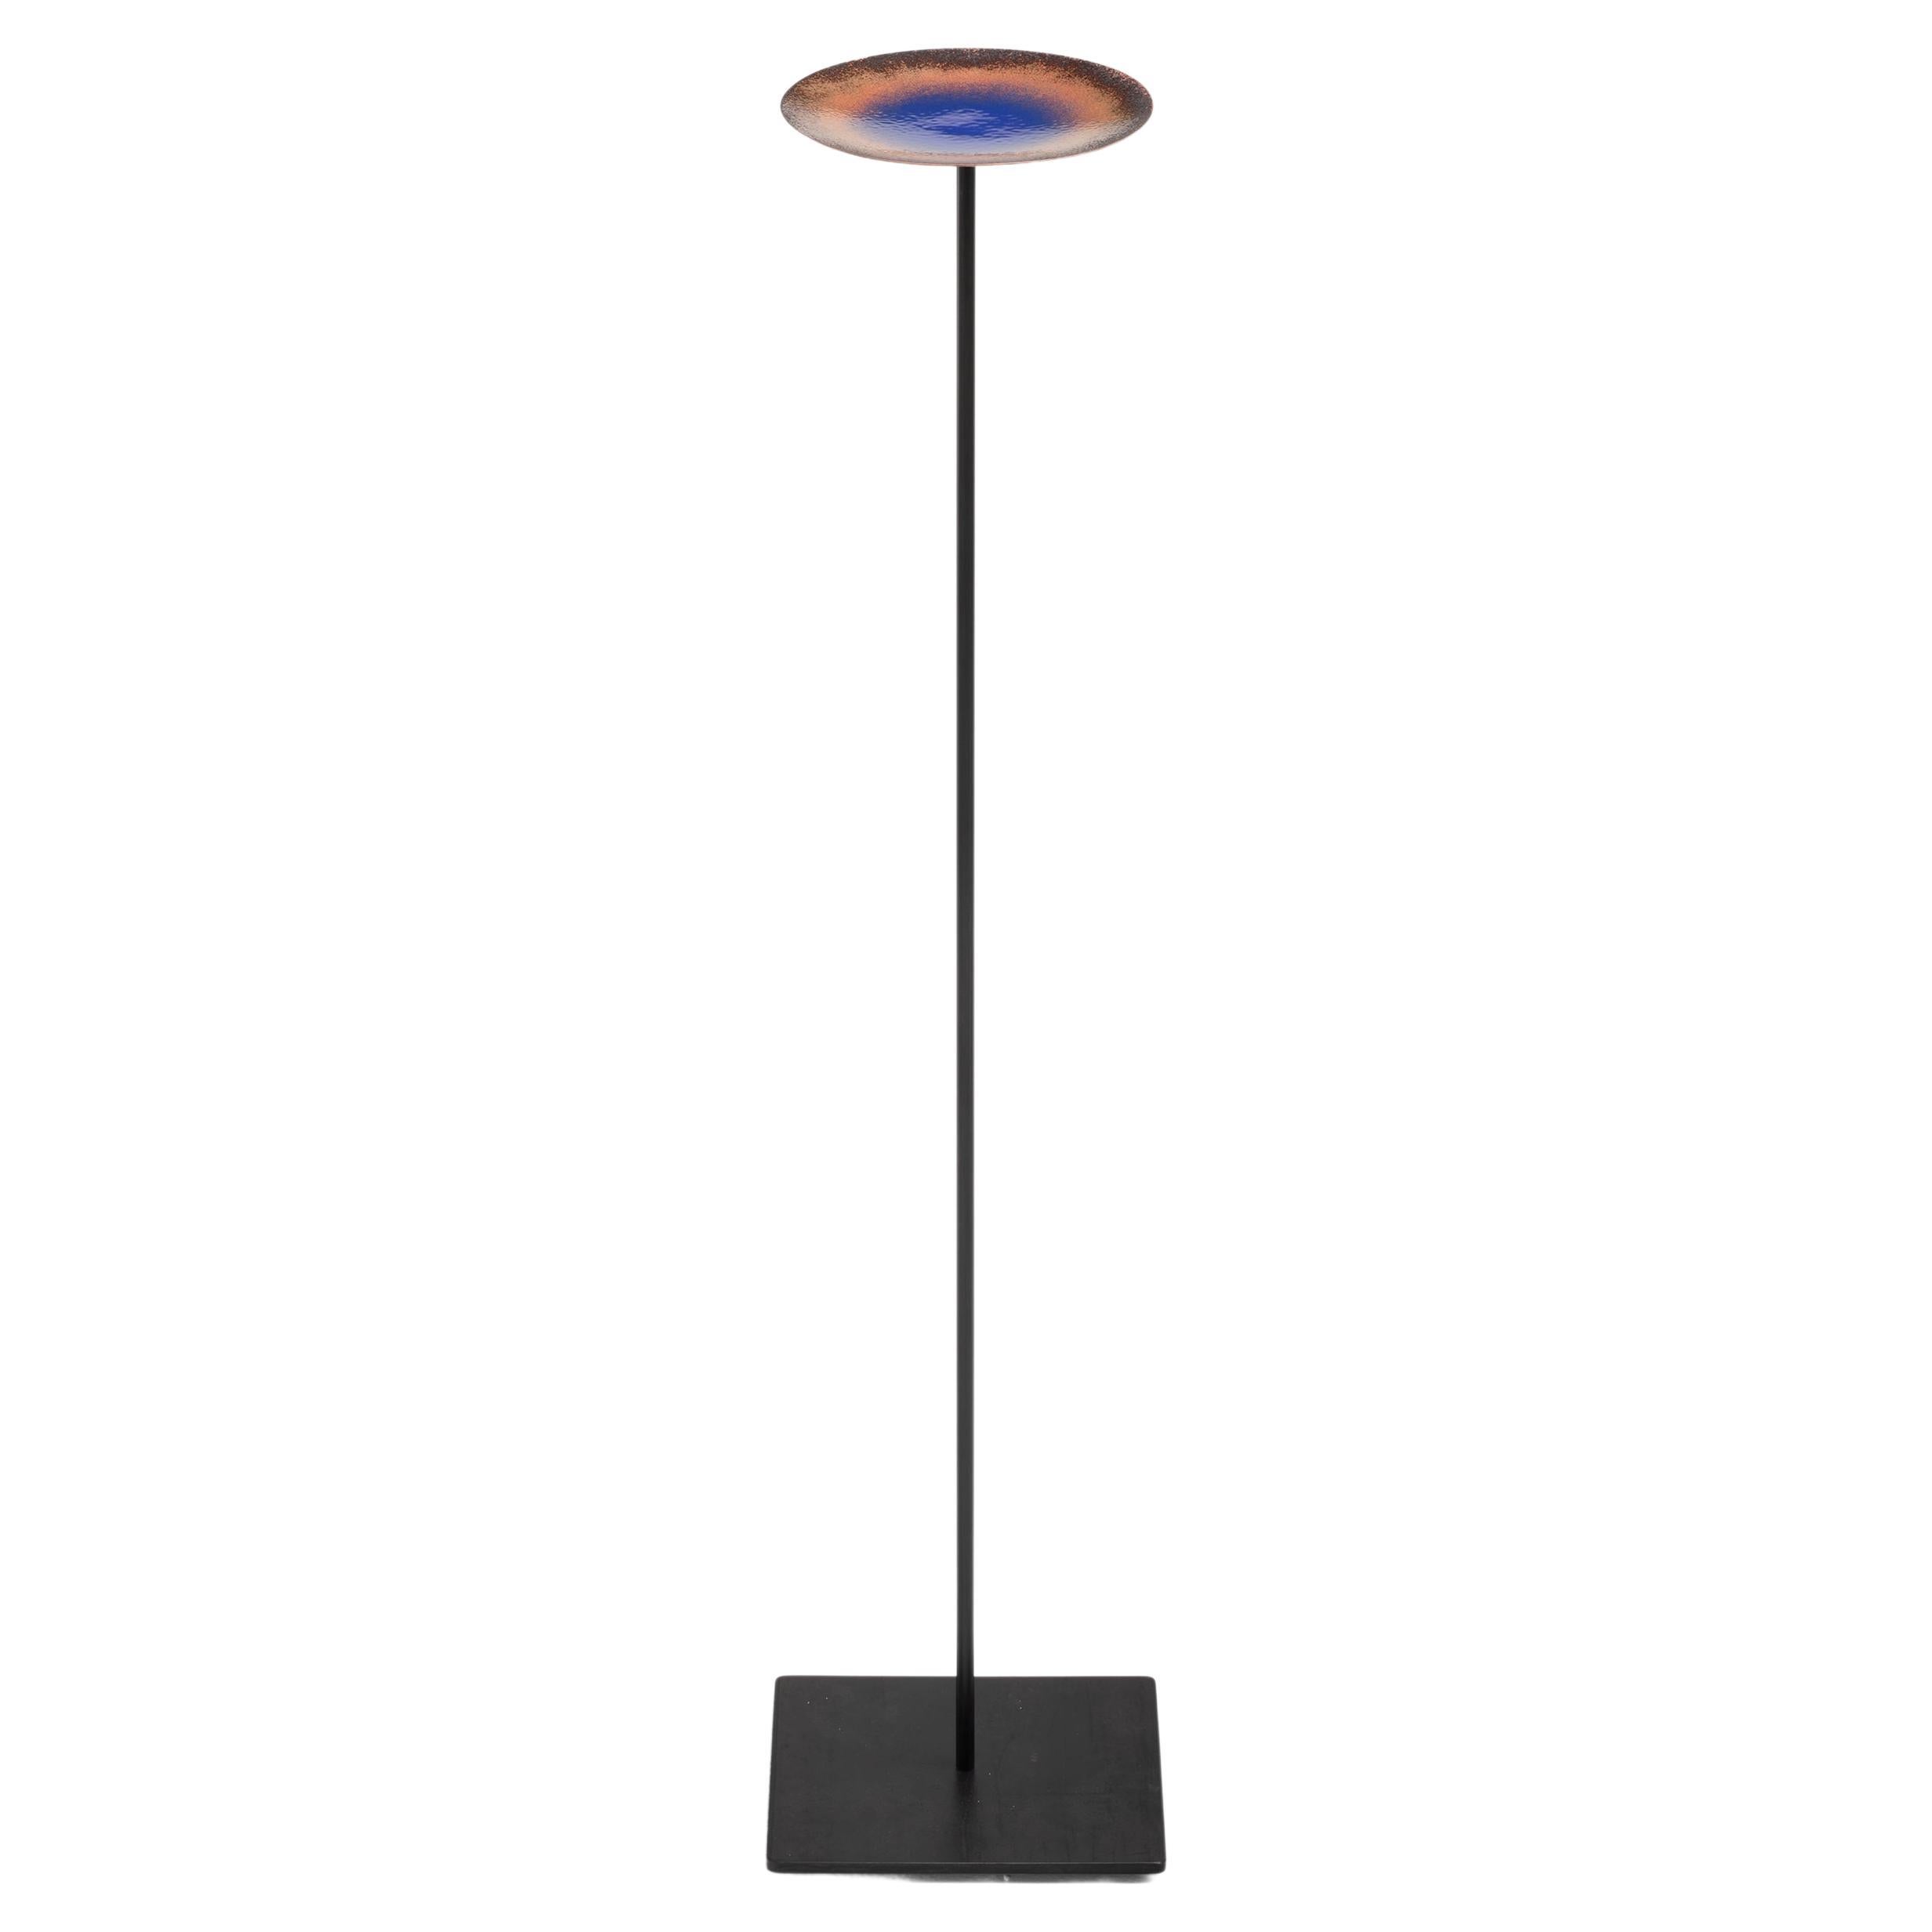 Specola, Dish on Floor Stand, Fire Enamel on Copper For Sale